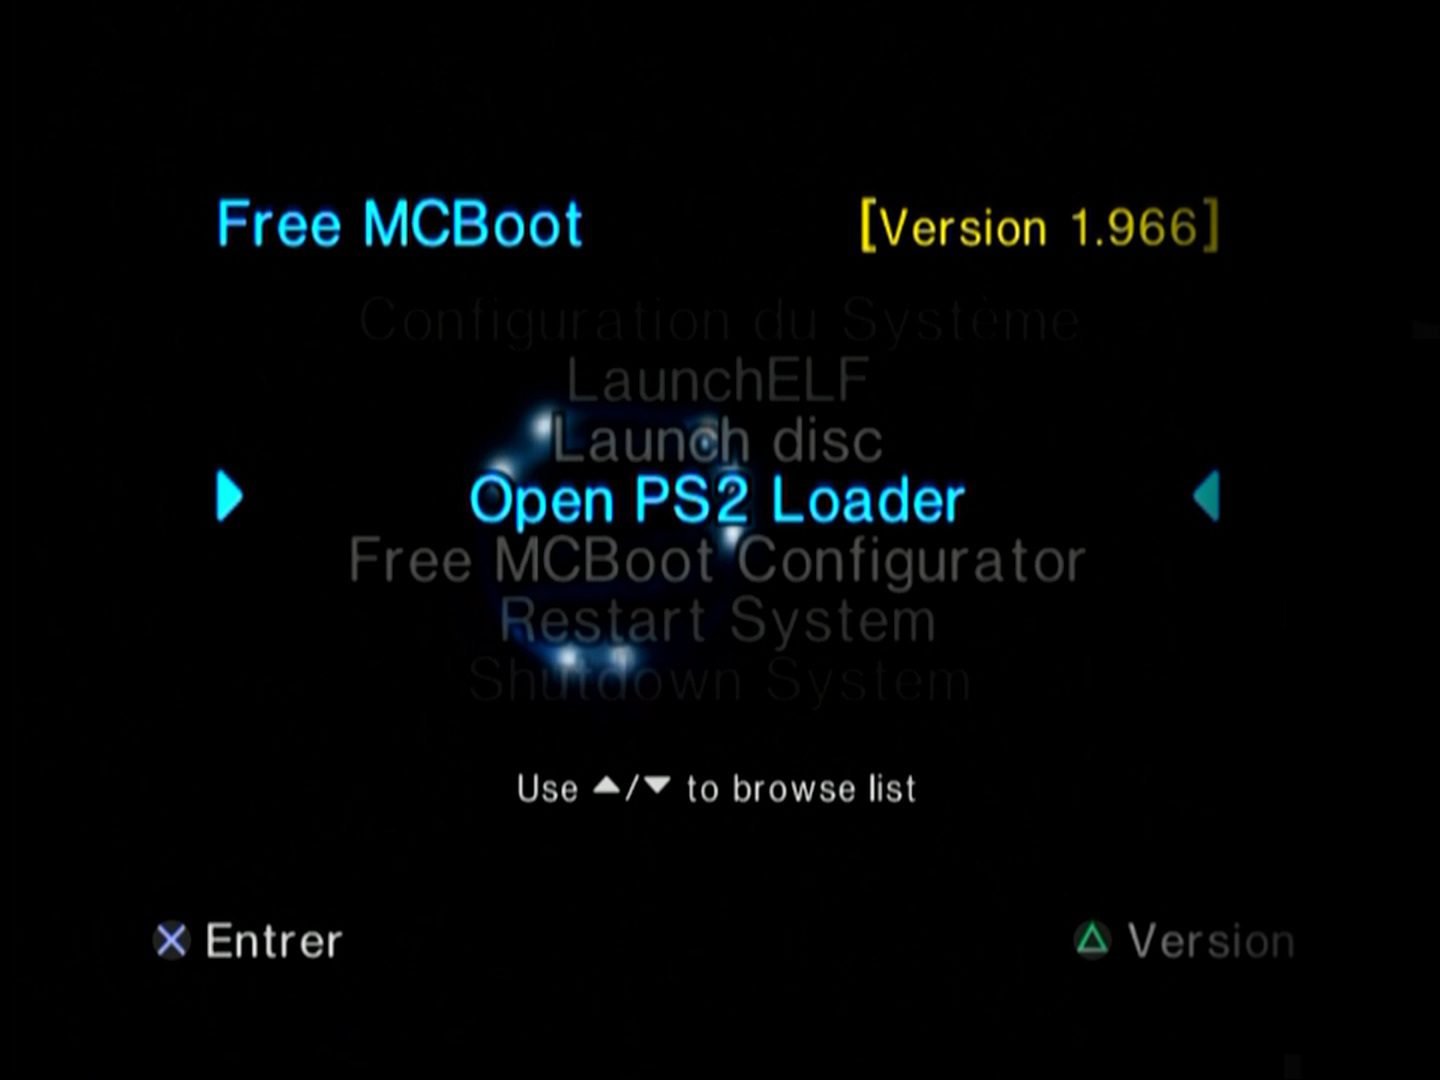 Installing and configuring the PlayStation 2 OPL (Open PS2 Loader) 95